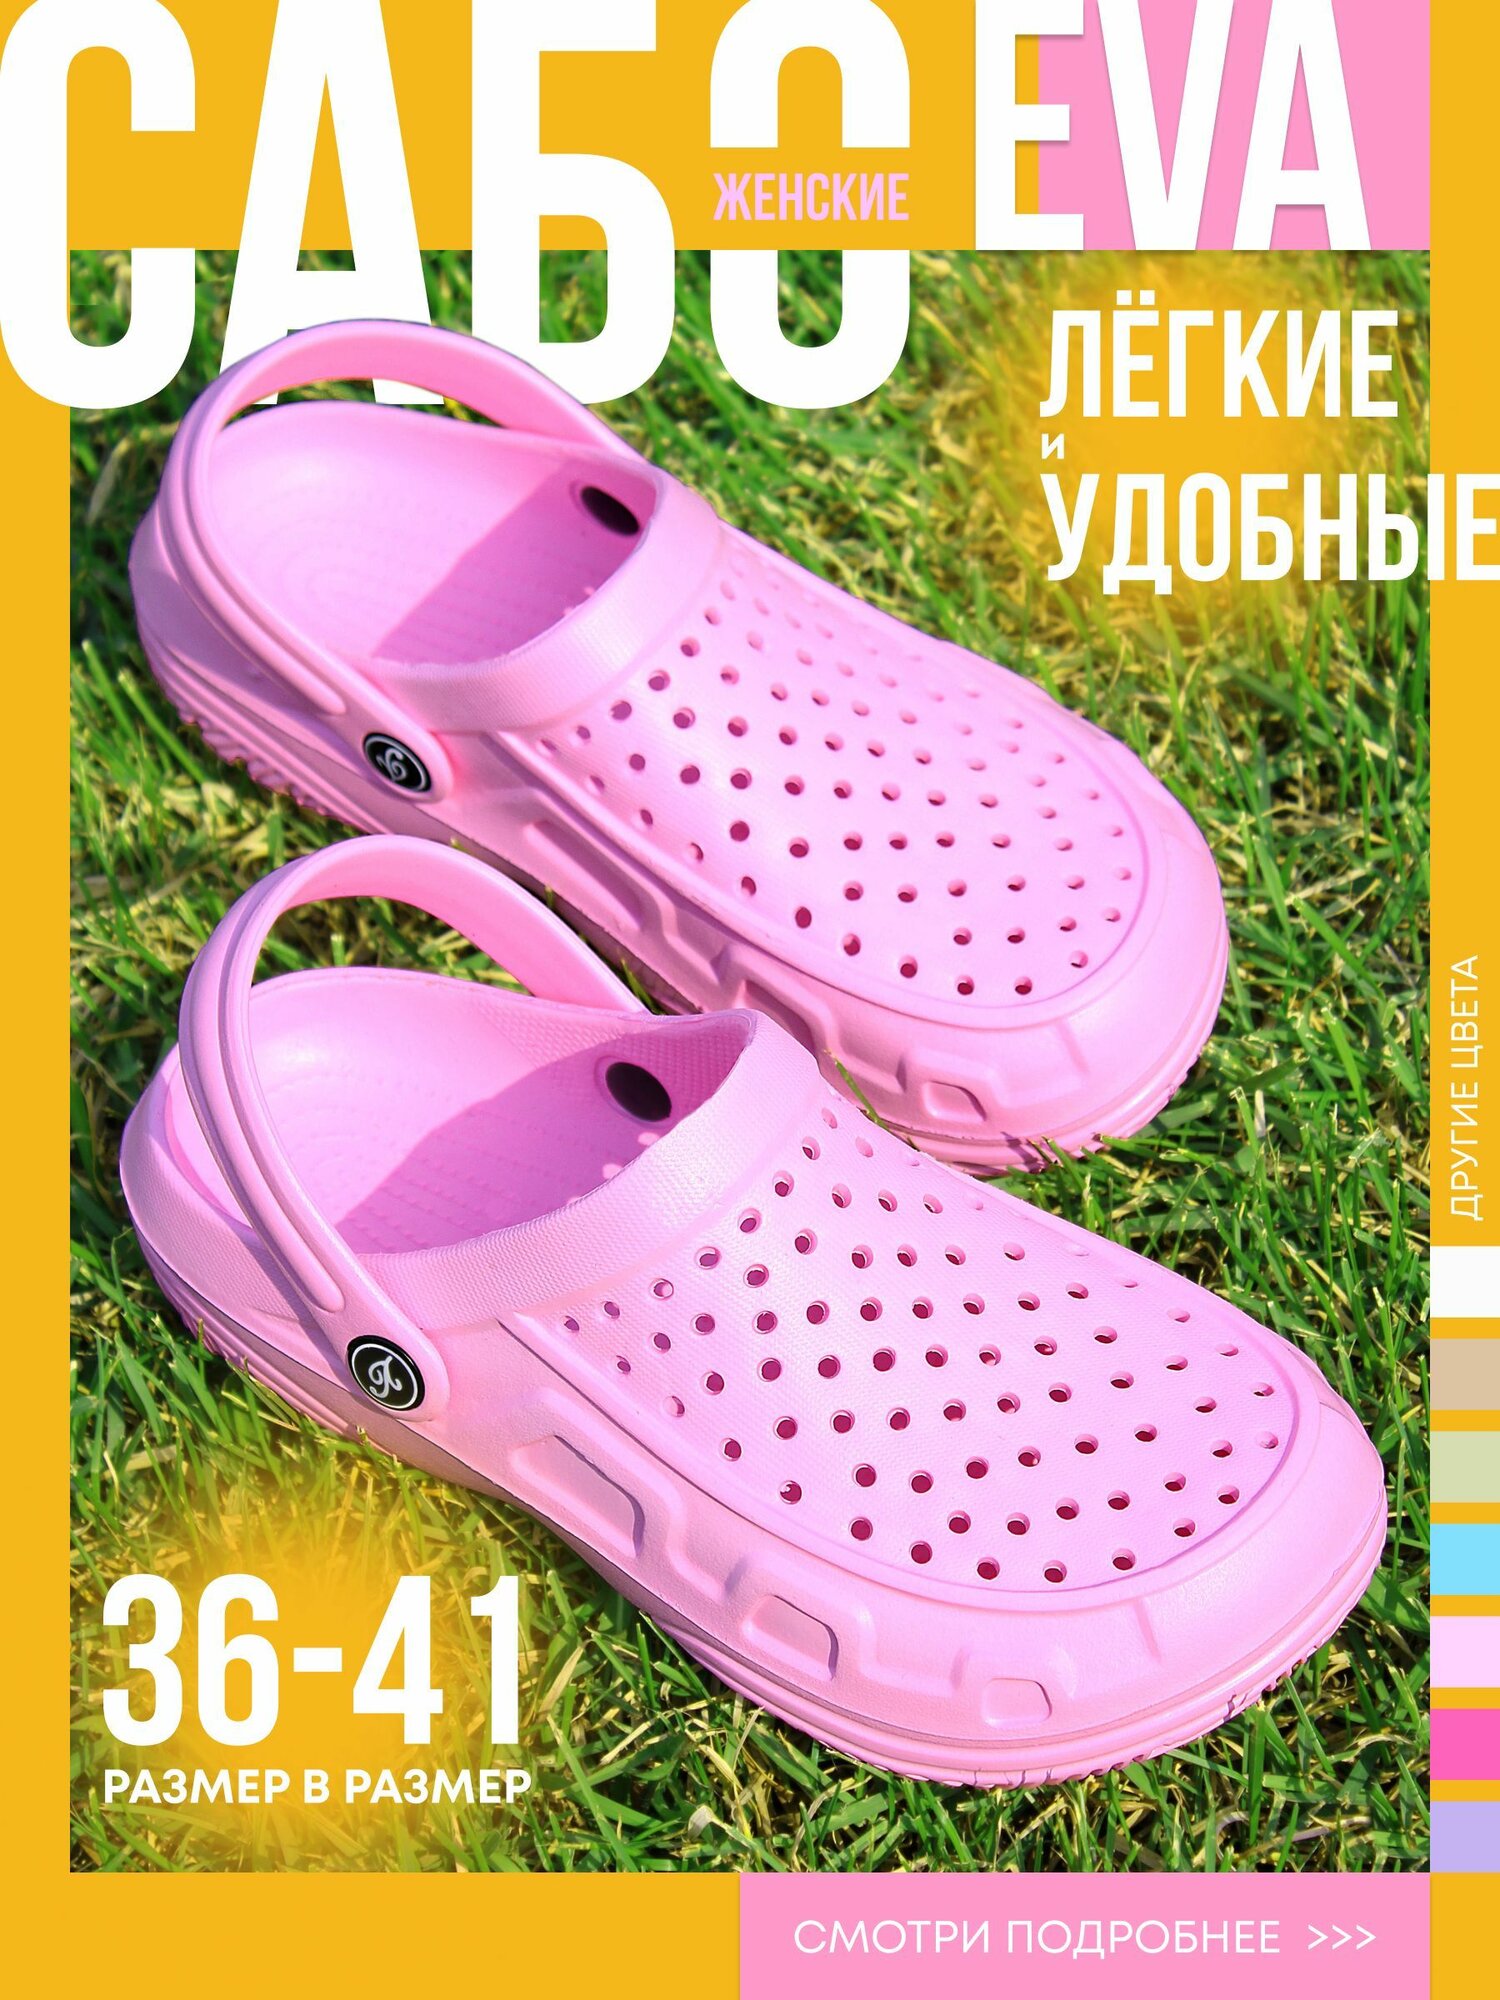 Сабо